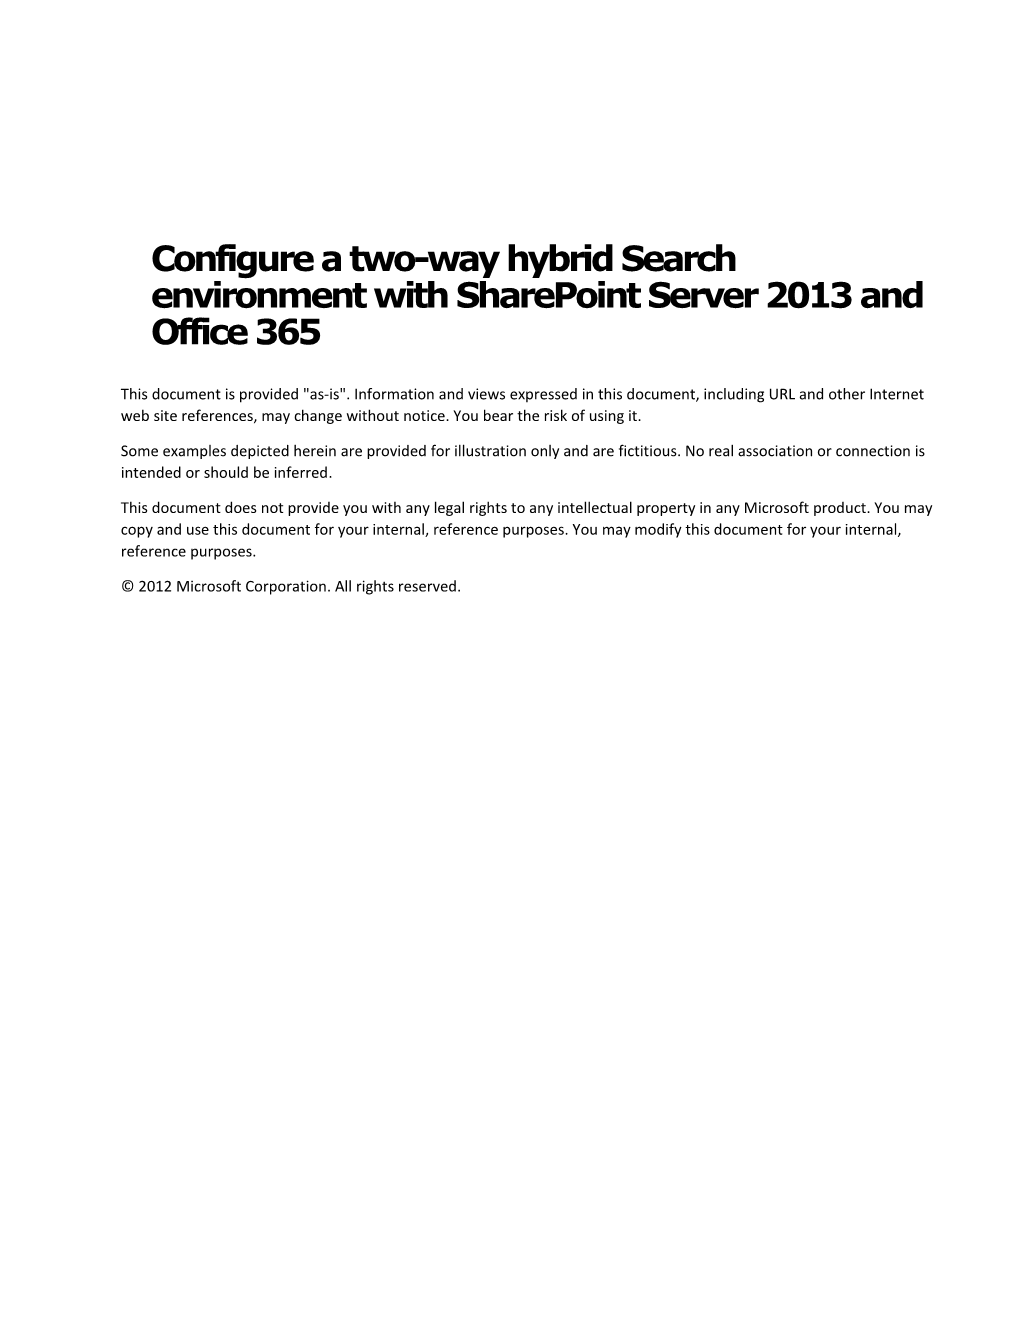 Configure a Two-Way Hybrid Search Environment with Sharepoint Server 2013 and Office 365